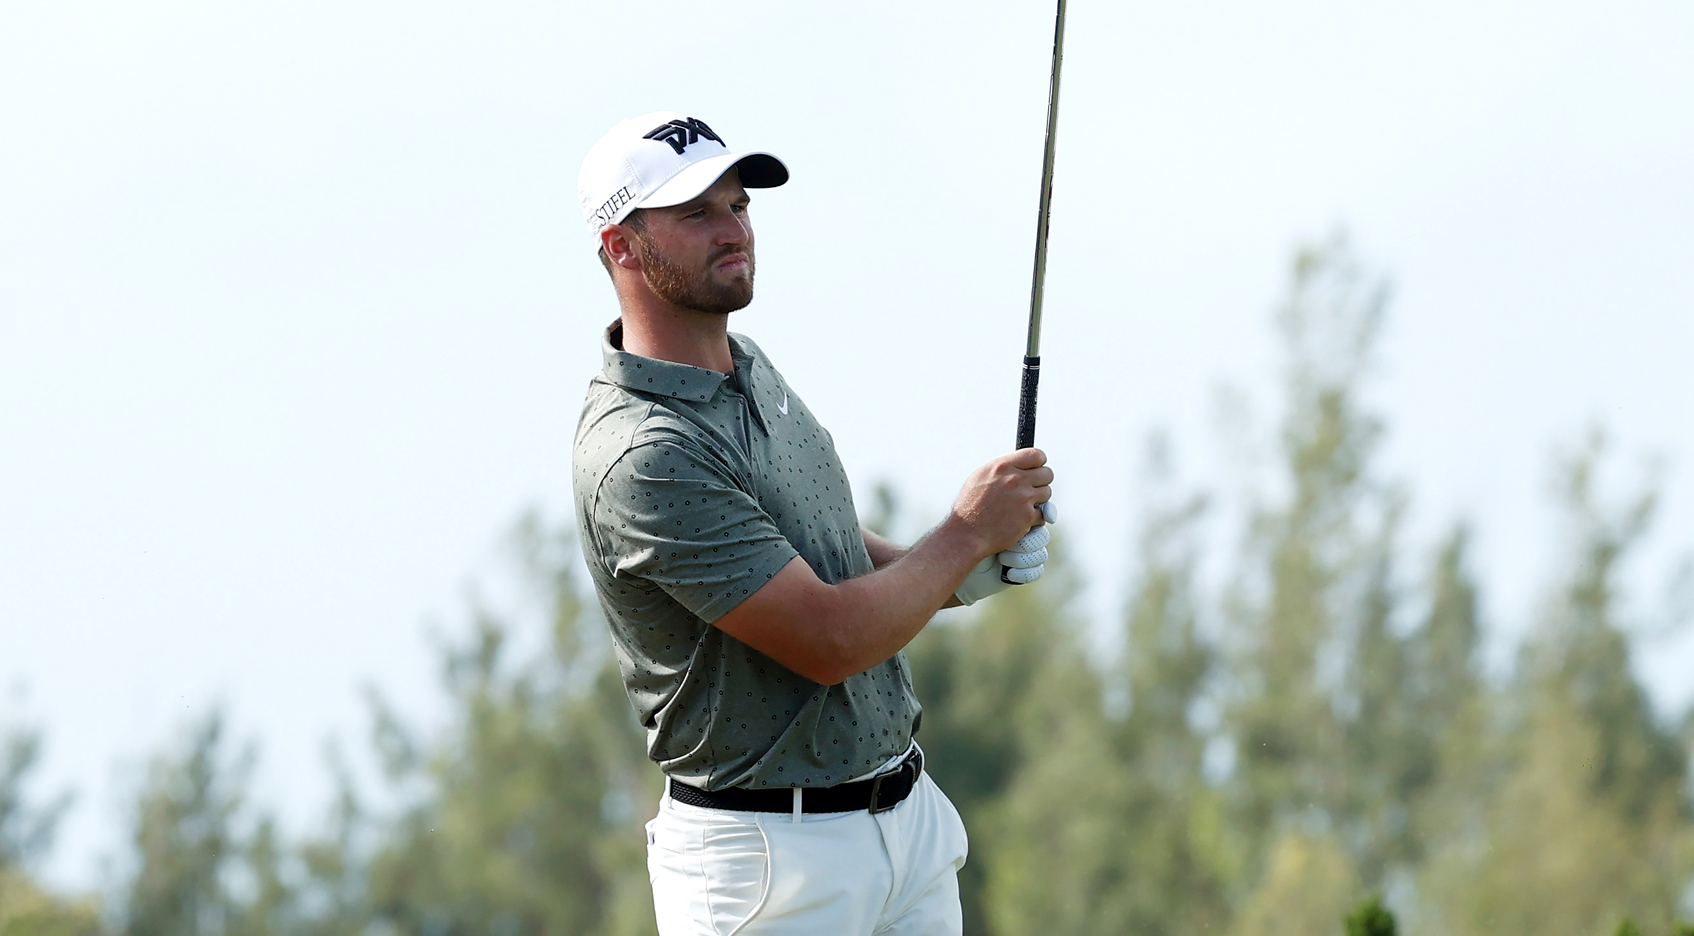 Two tied for 36-hole lead at Bermuda Championship